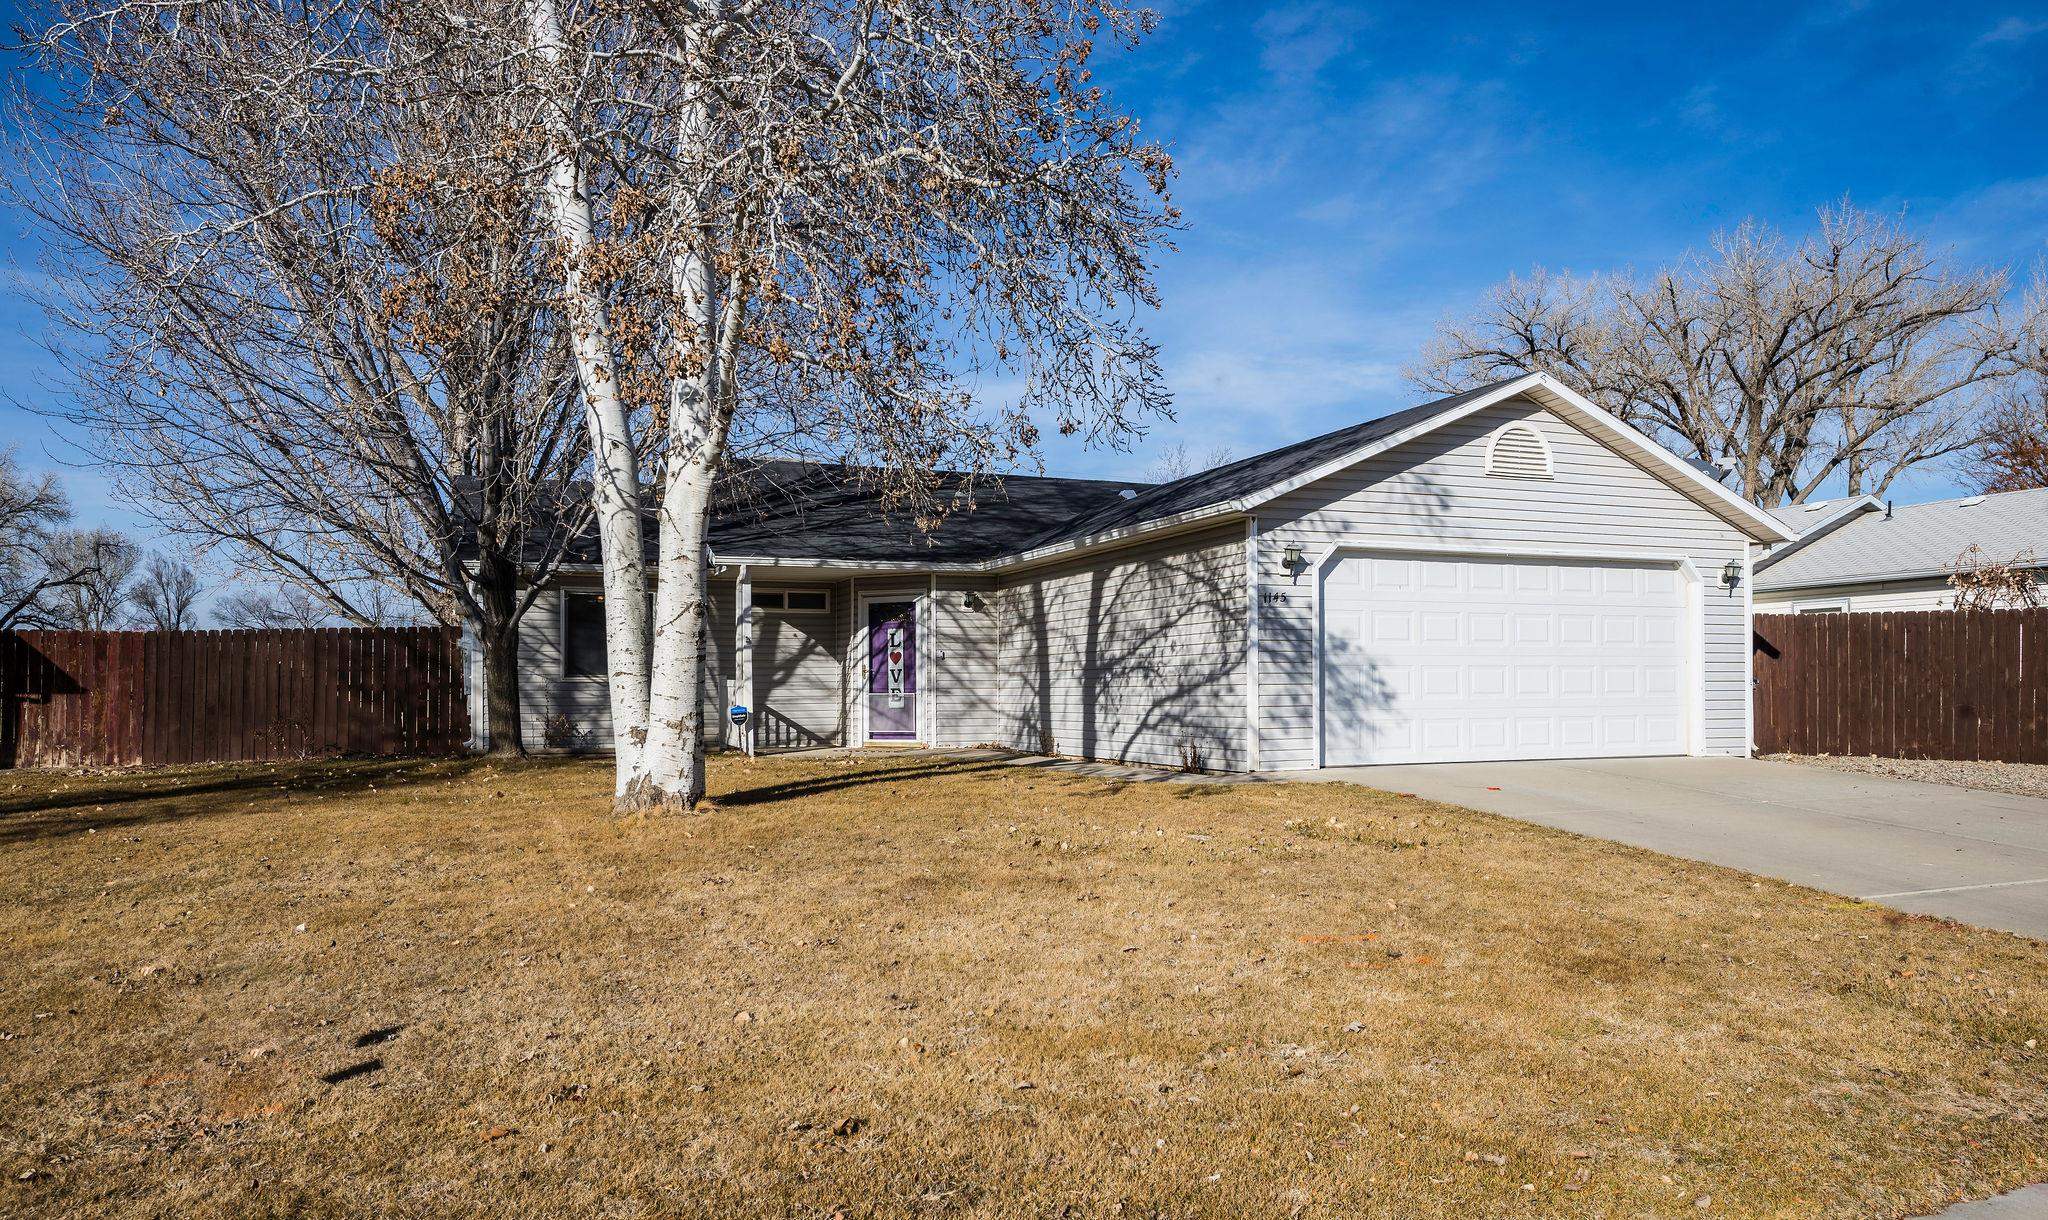 This charming rancher is the perfect Fruita home.  Open concept living with three bedrooms and a newly remodeled primary bathroom!  Updated vinyl floors throughout the home, new evaporative cooler, new water heater in 2022 and a large backyard with mature trees!   Schedule a private showing today – this one won’t last long!